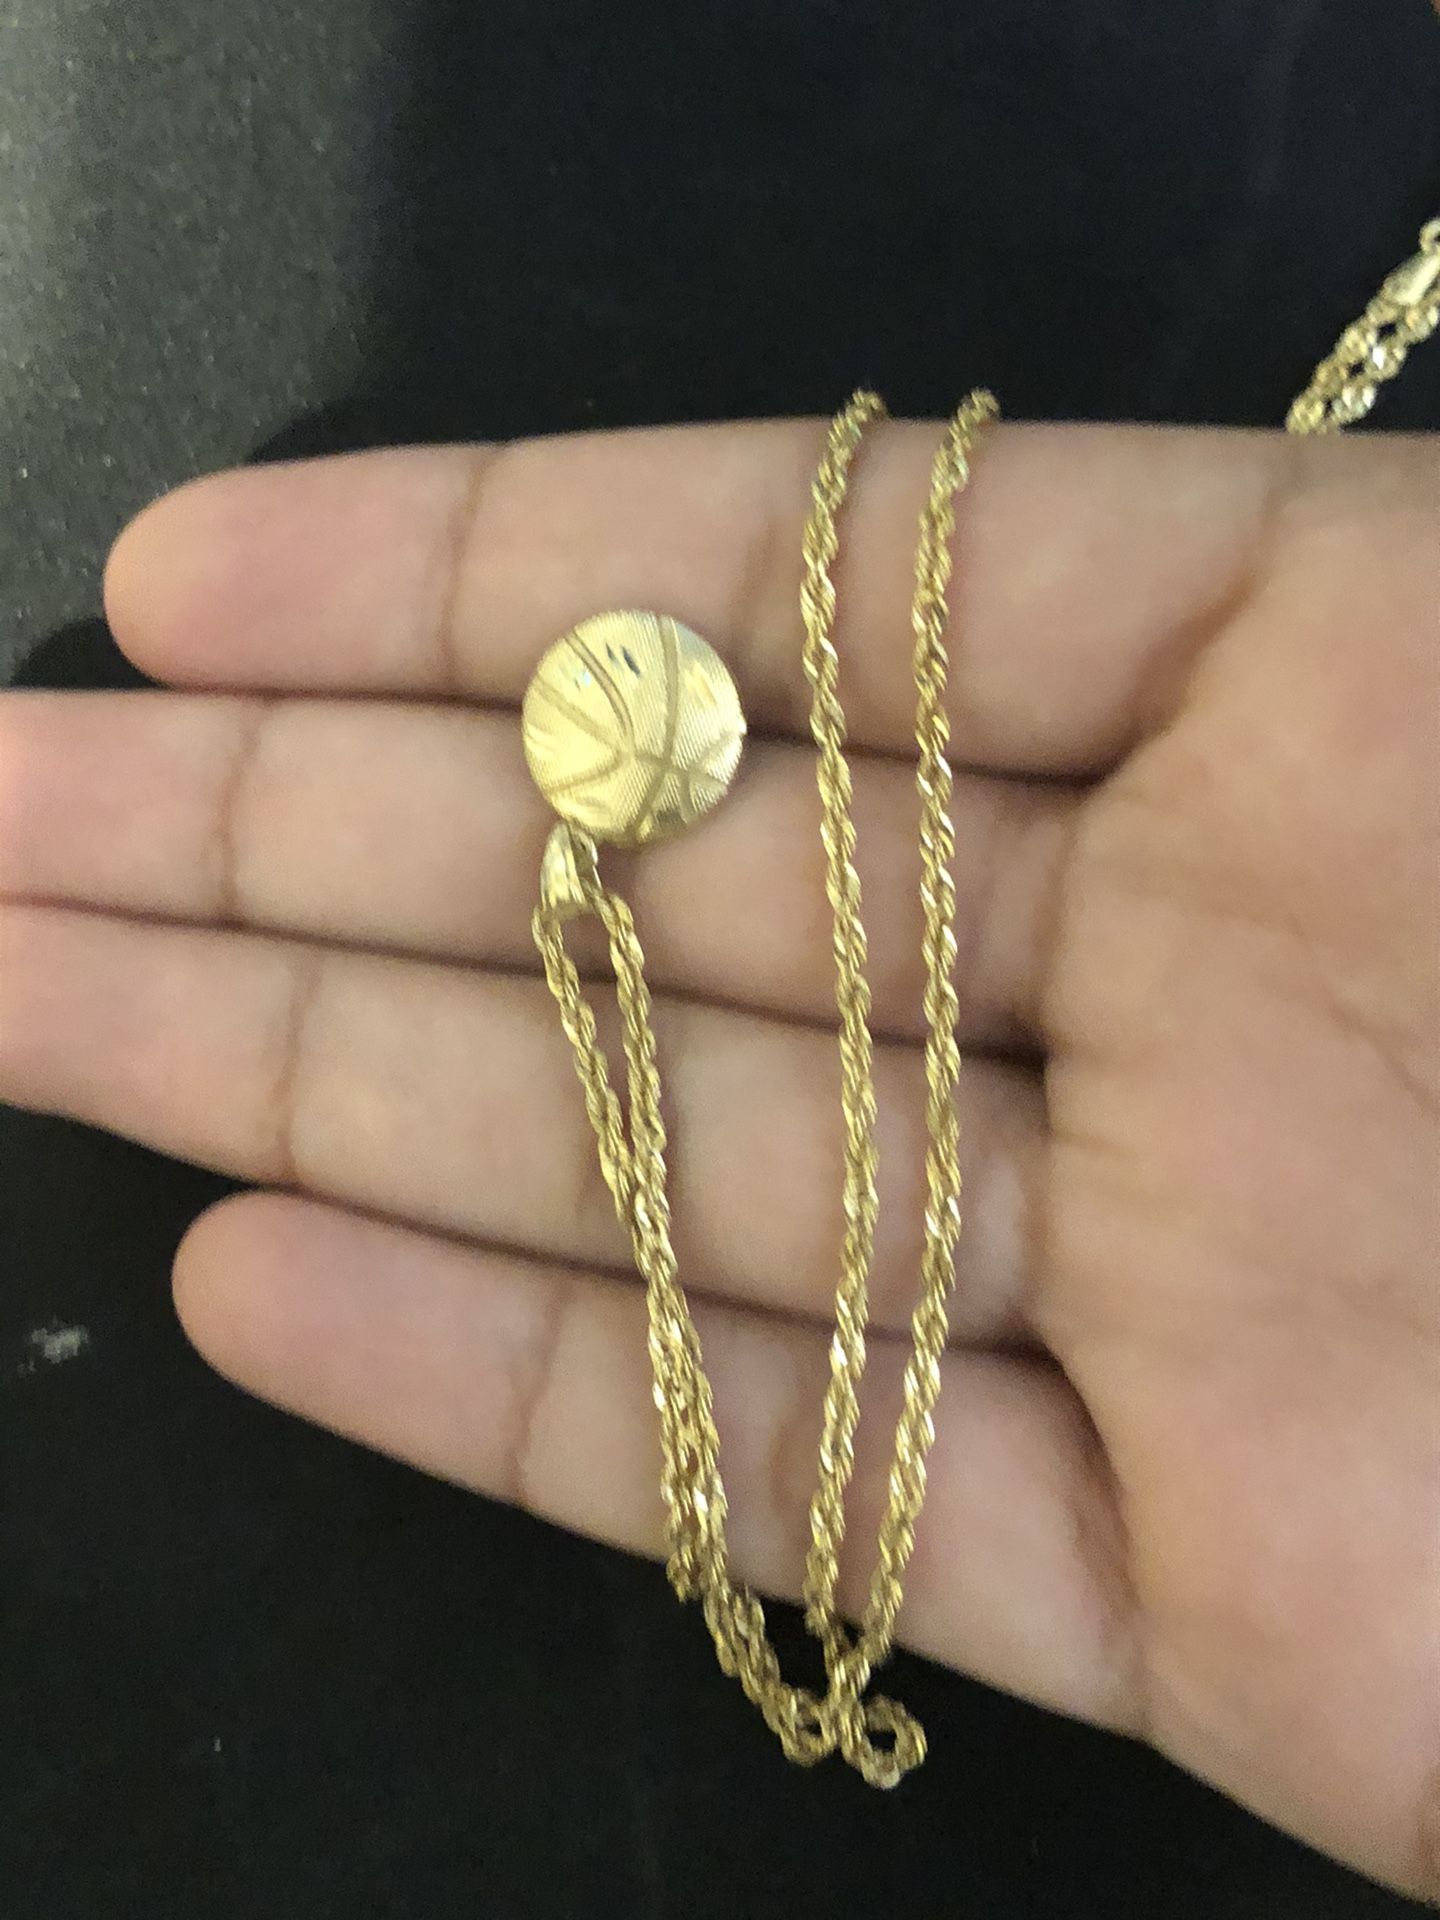 10k gold rope chain 24”